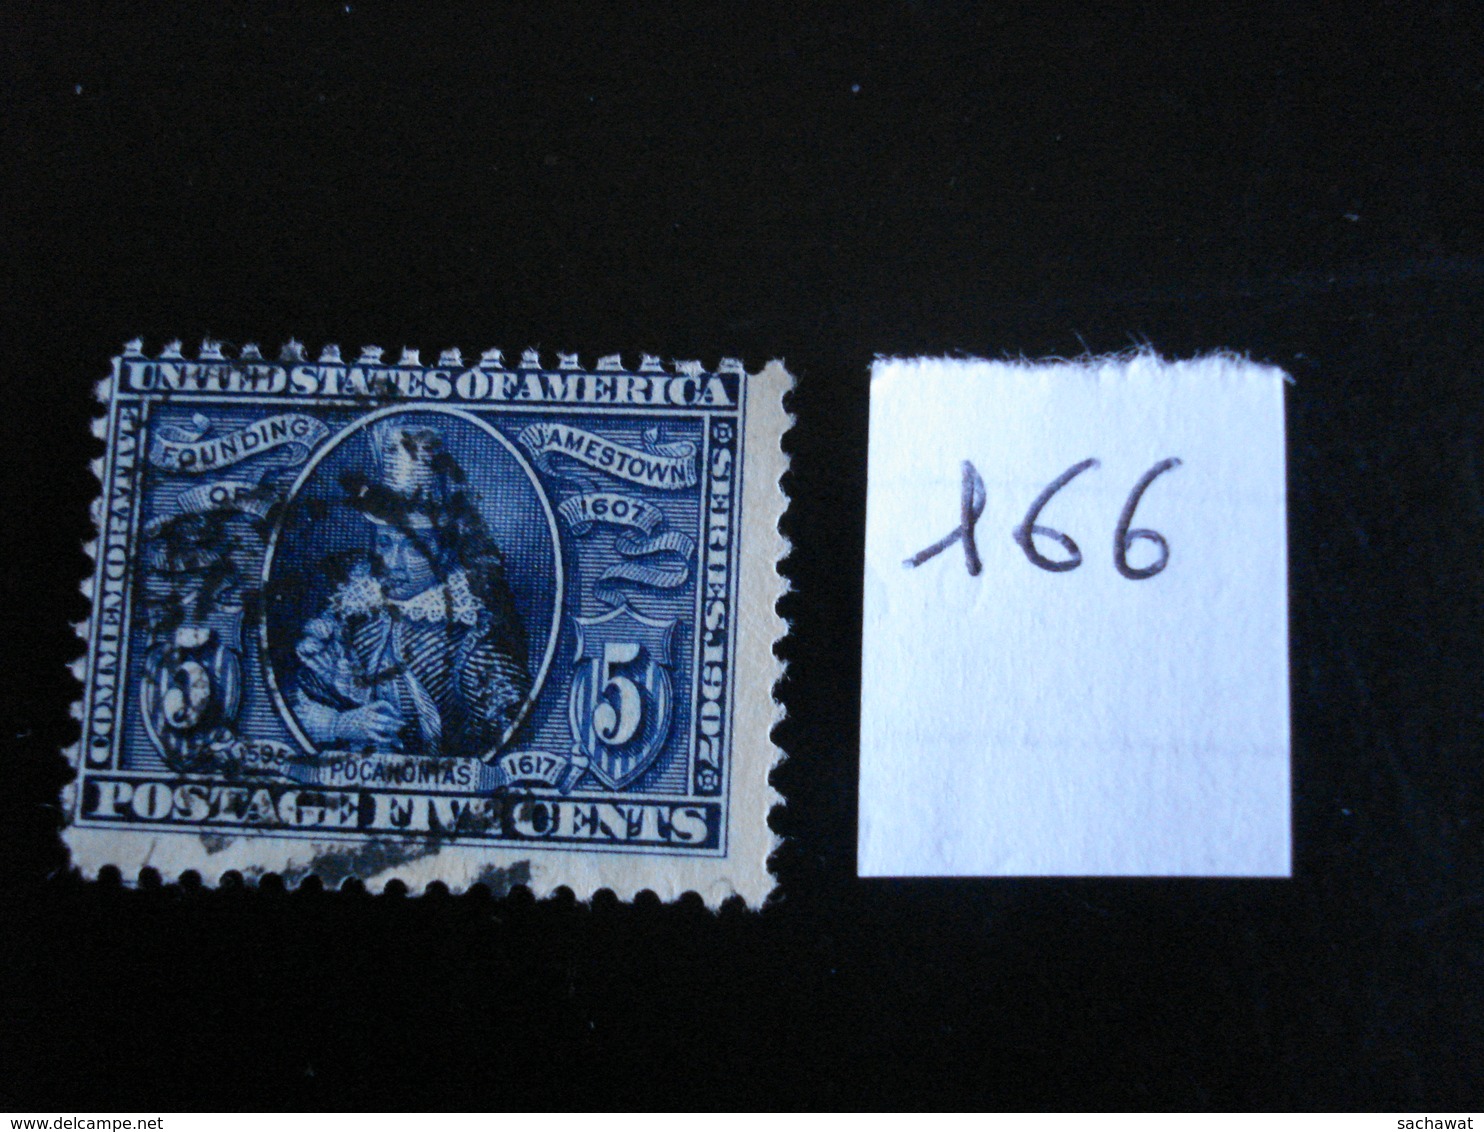 USA - Année 1907 - Pocahontas 5c Bleu - Y.T. 166 - Oblit. - Used - Gestempeld - Used Stamps